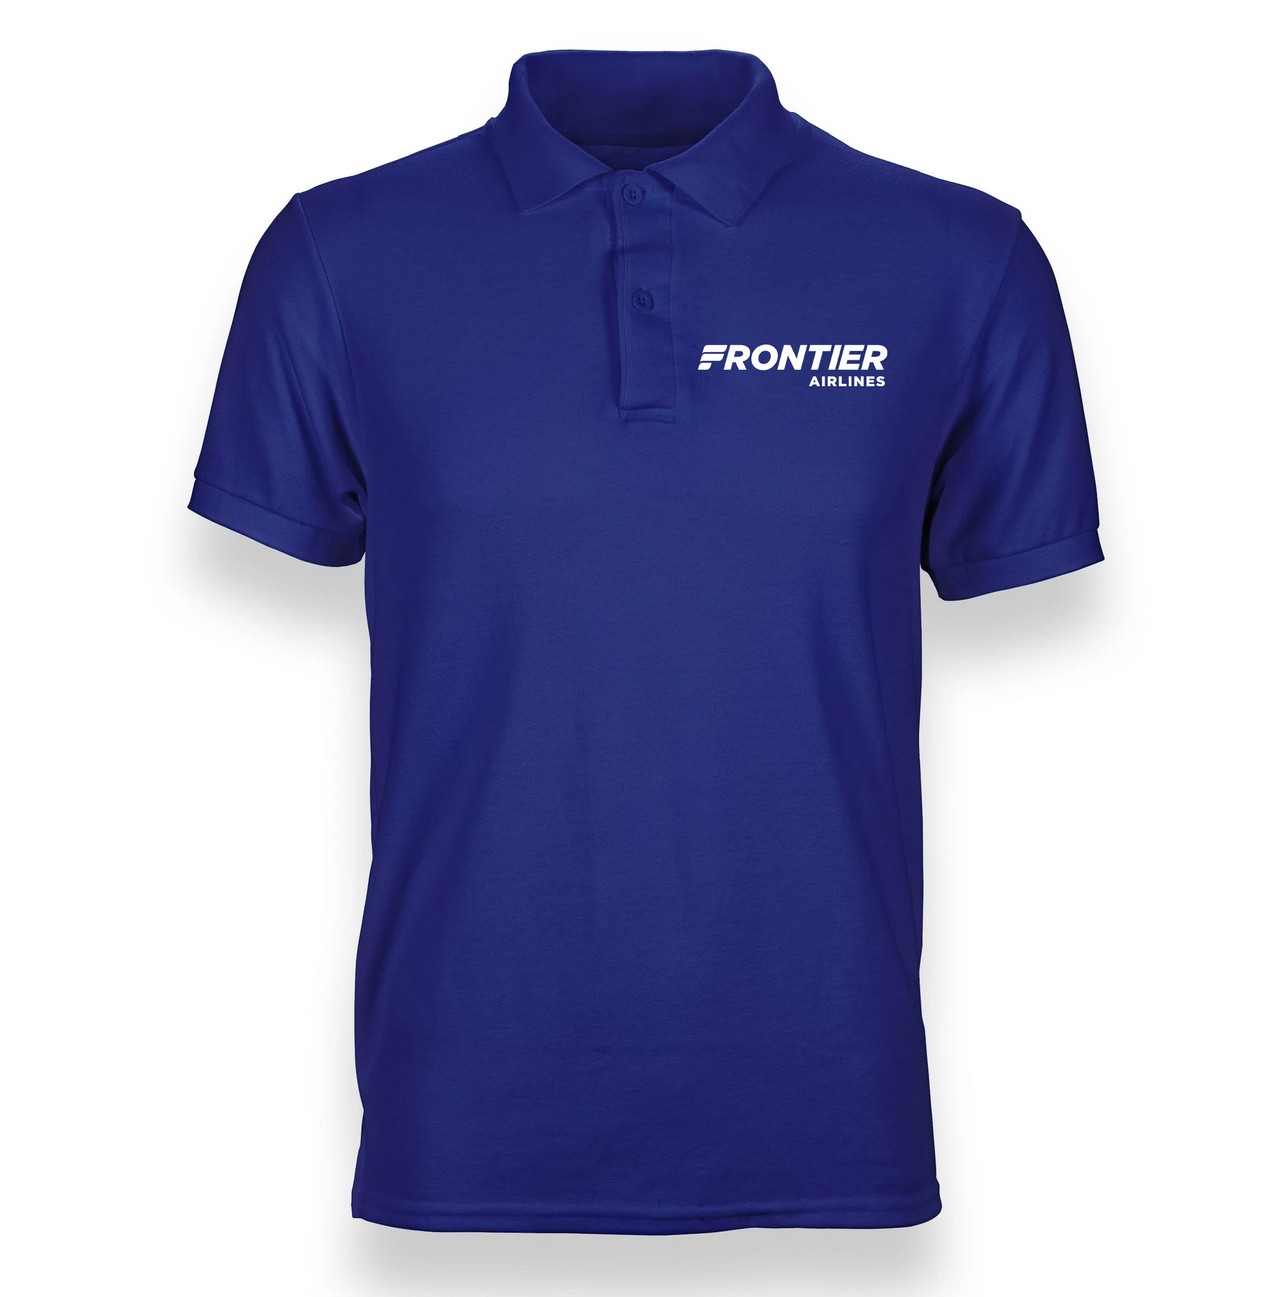 FRONTIER AIRLINES POLO T-SHIRT